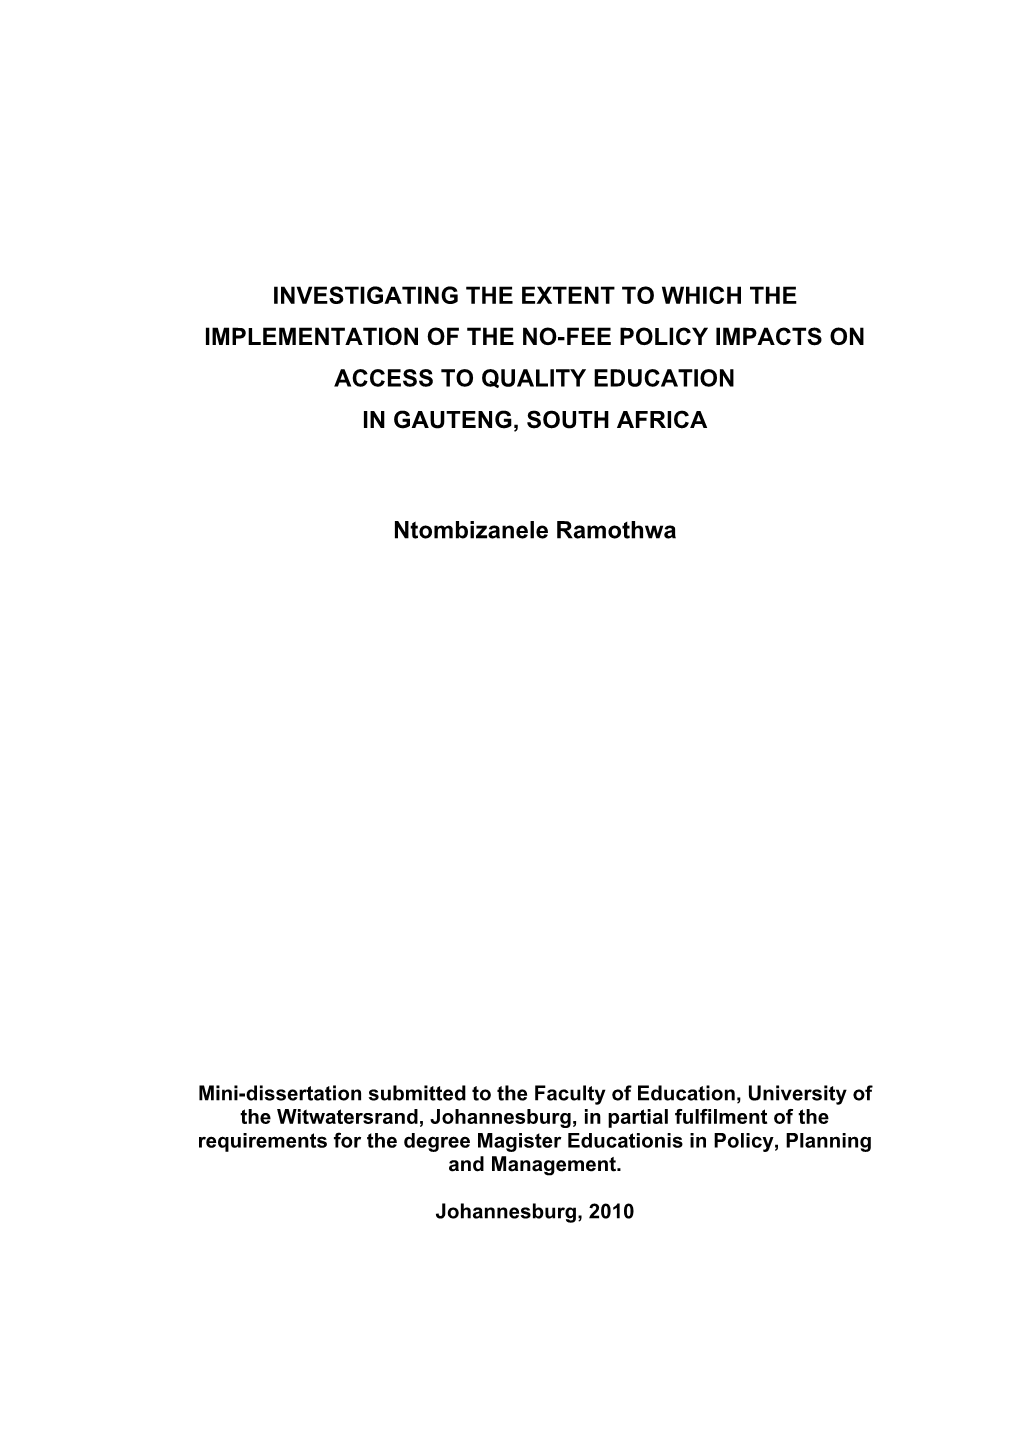 Investigating the Extent to Which the Implementation of the No-Fee Policy Impacts on Access to Quality Education in Gauteng, South Africa